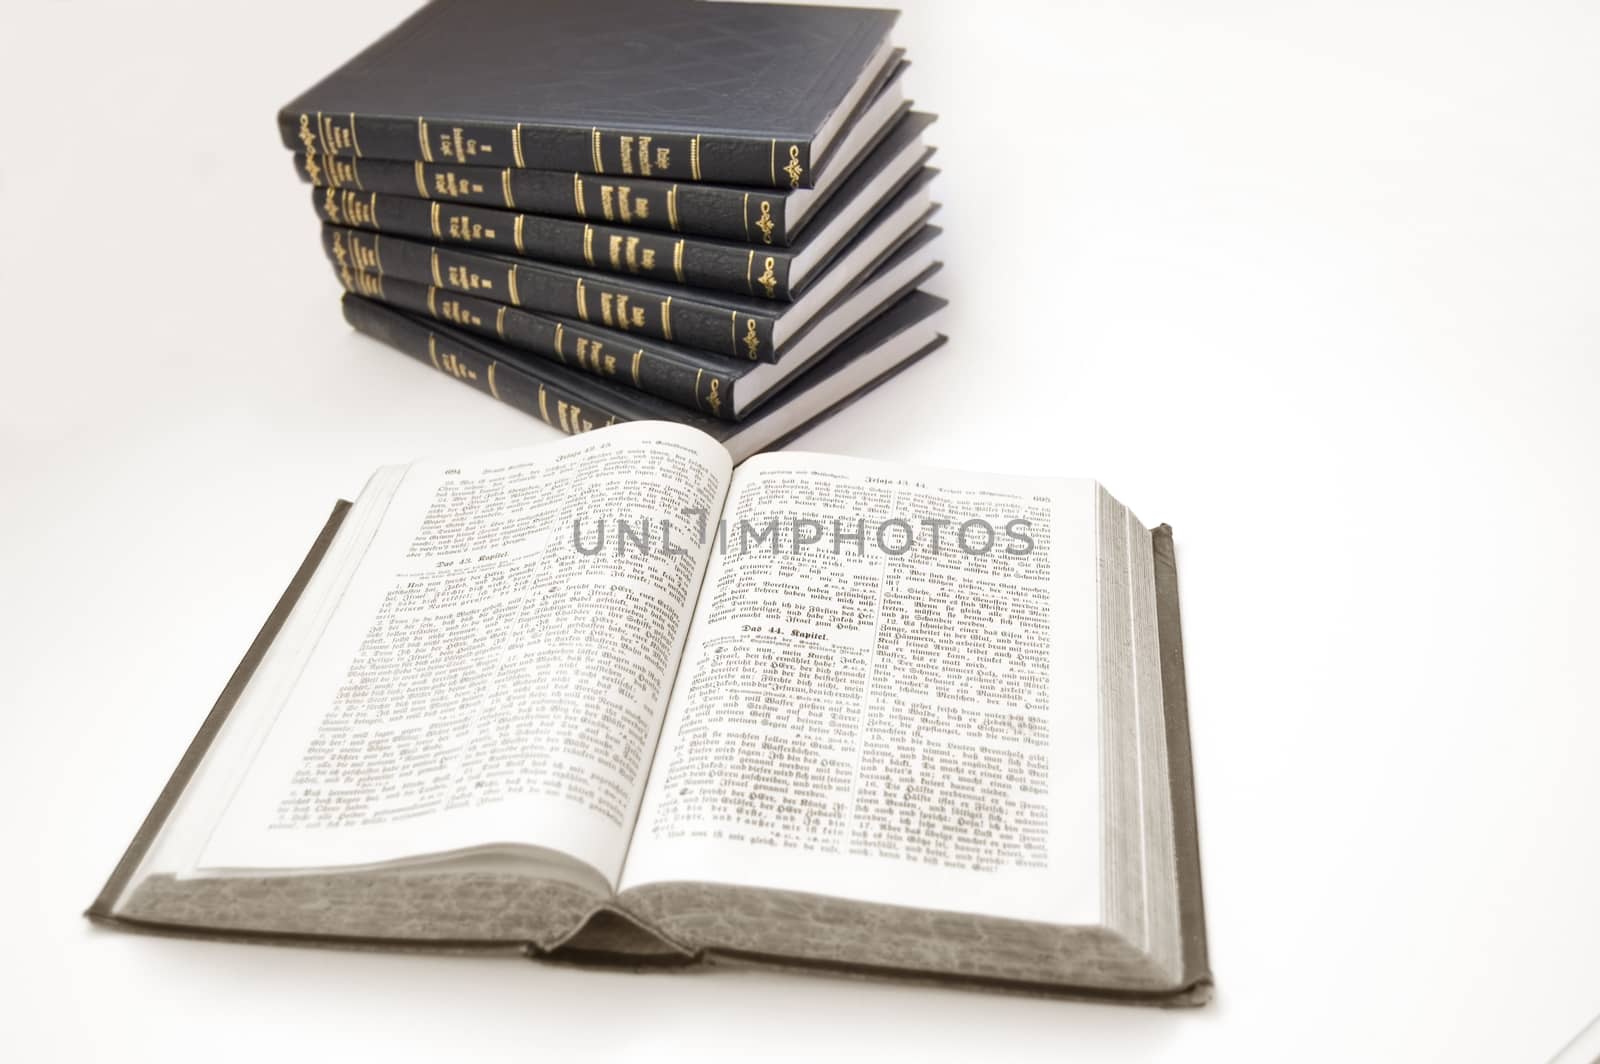 Bible conceptual image. Bible and other books on isolated background.